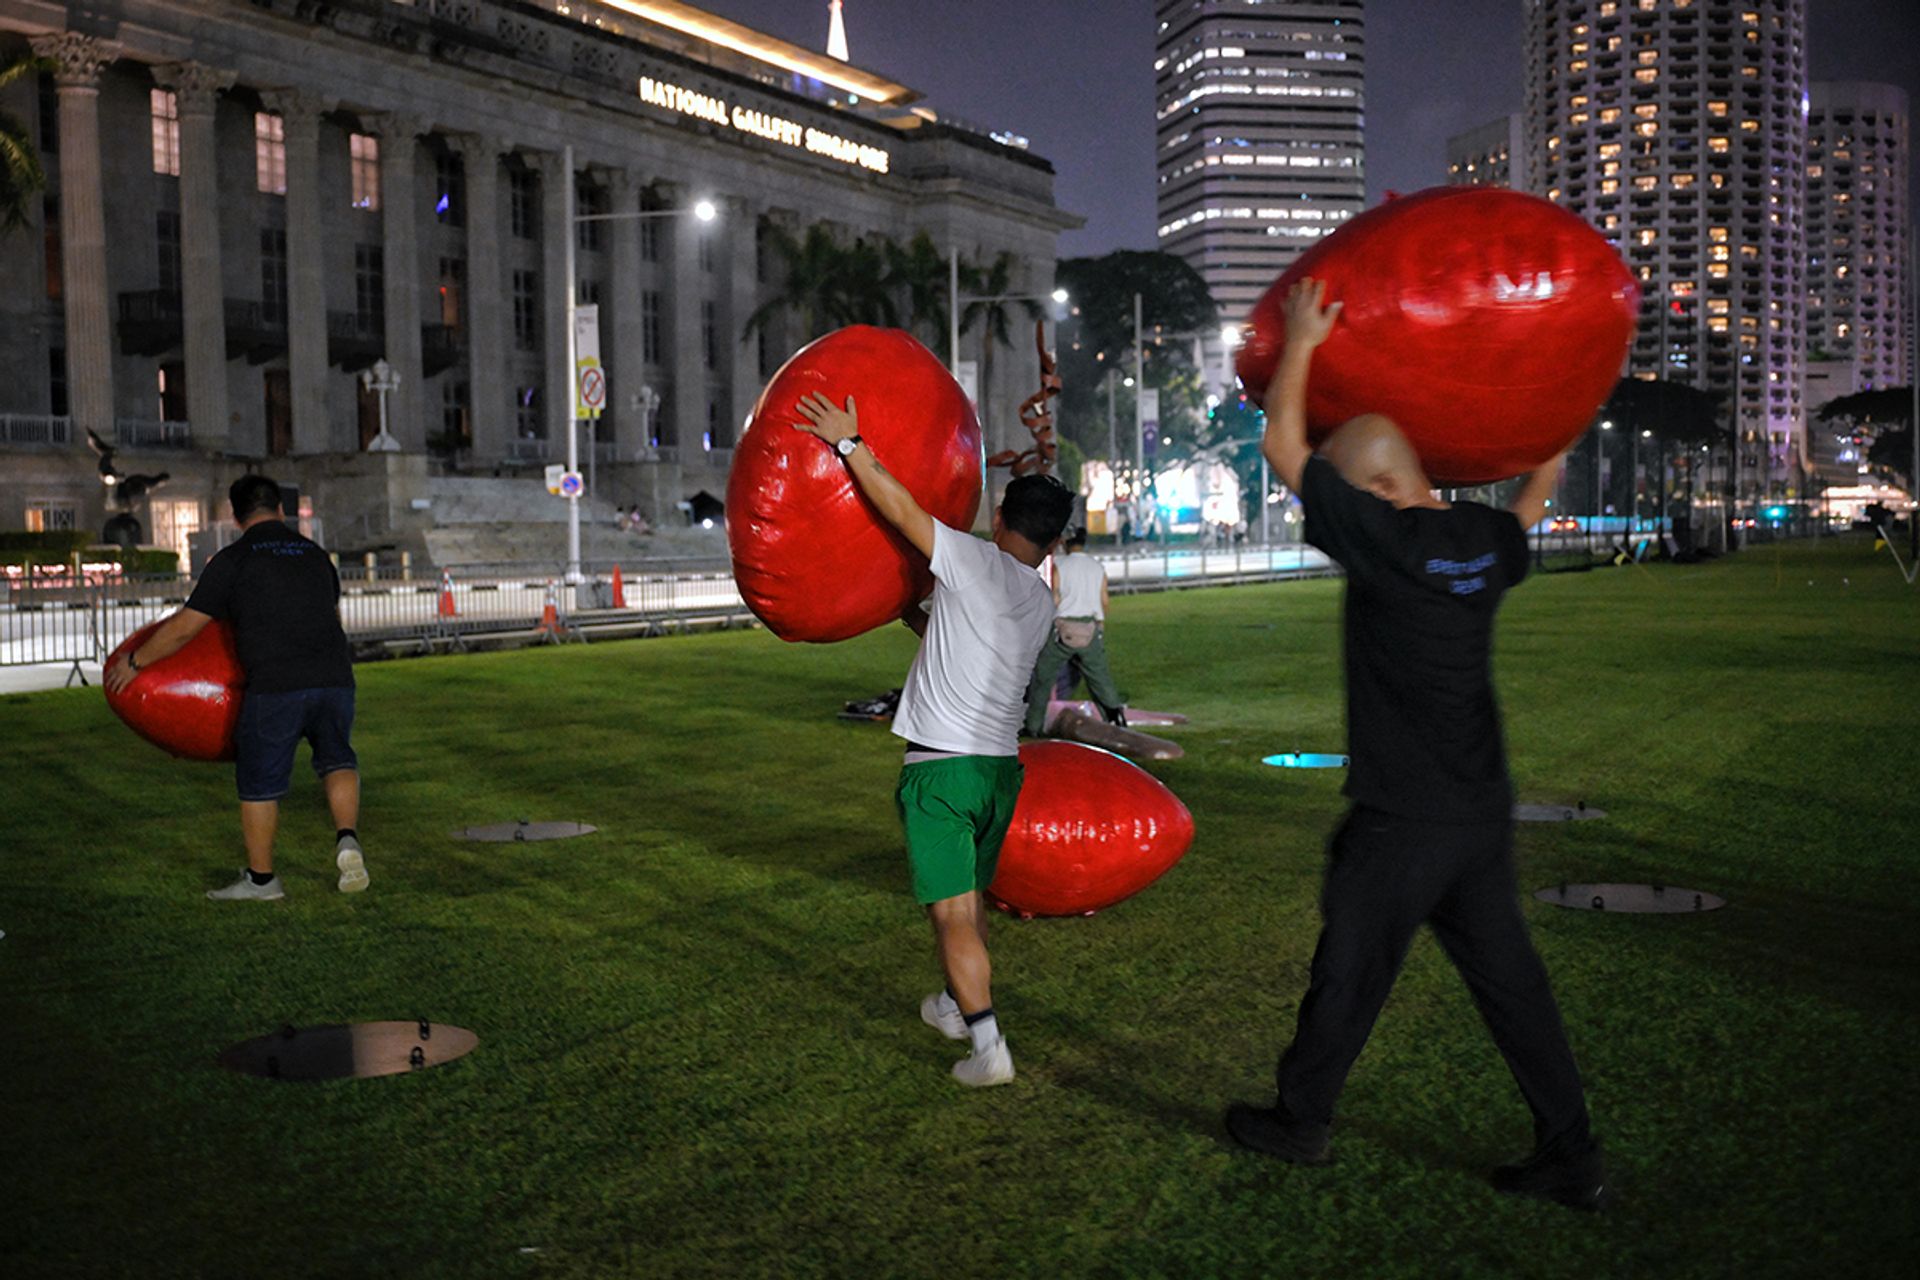 Inflatable saga seeds for artist Kumari Nahappan’s installation Wings of Change being moved during set-up at the Padang.